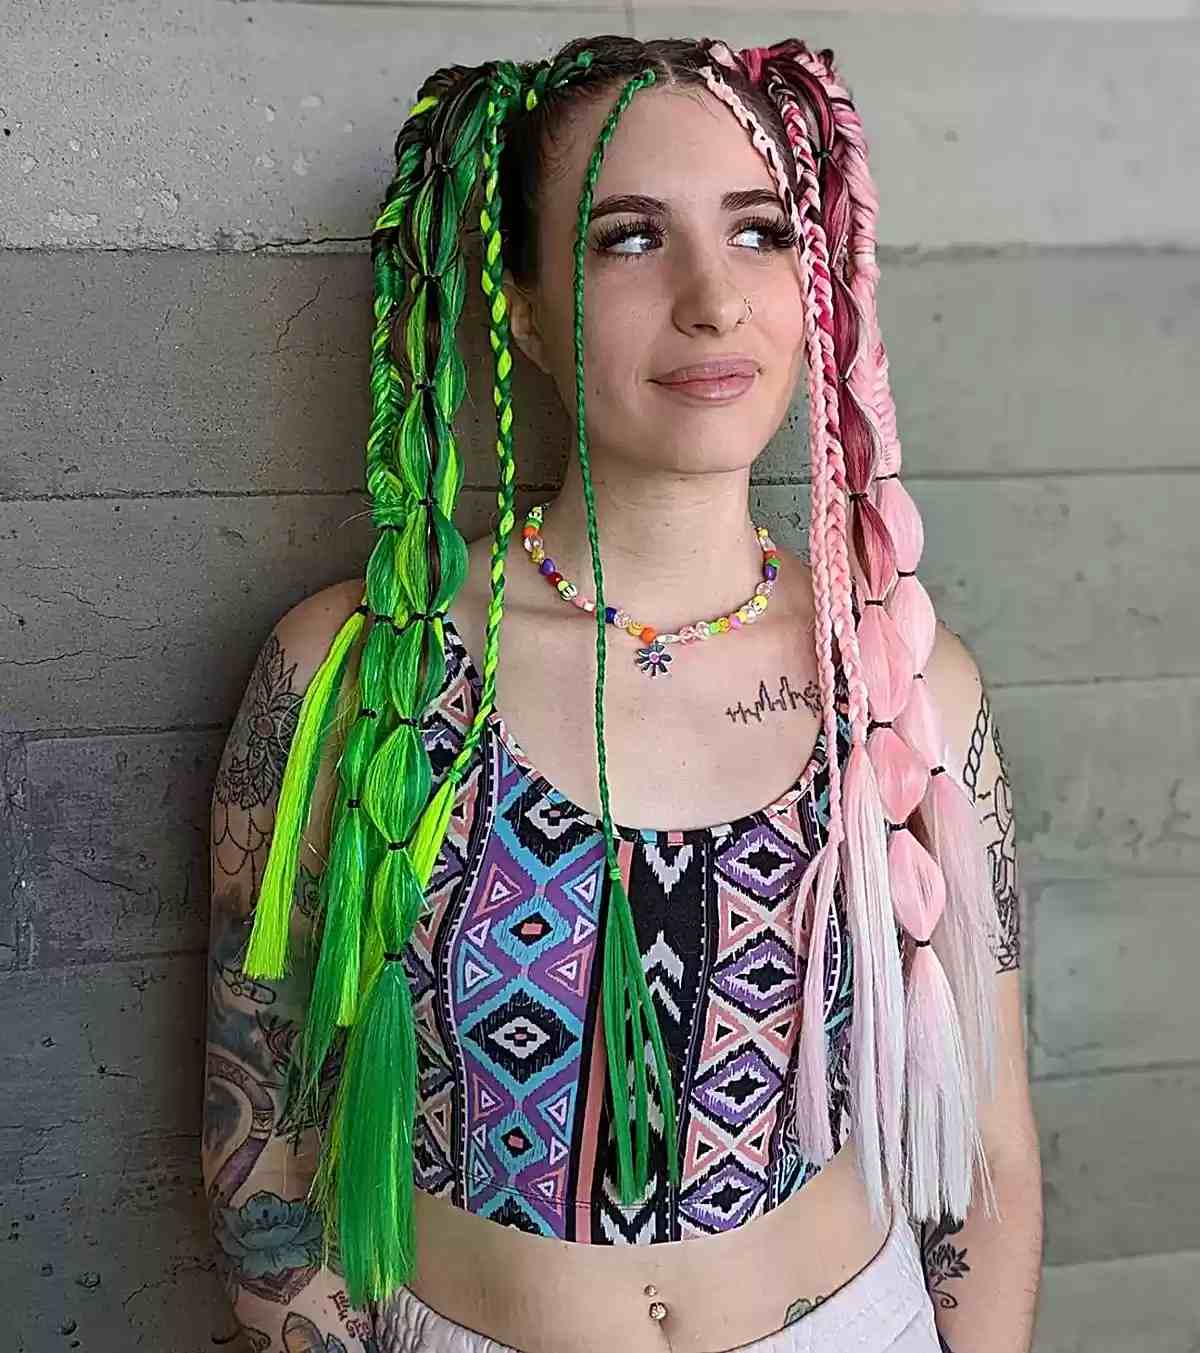 Long Hair with Green and Pink Rave Festival Pigtail Braids